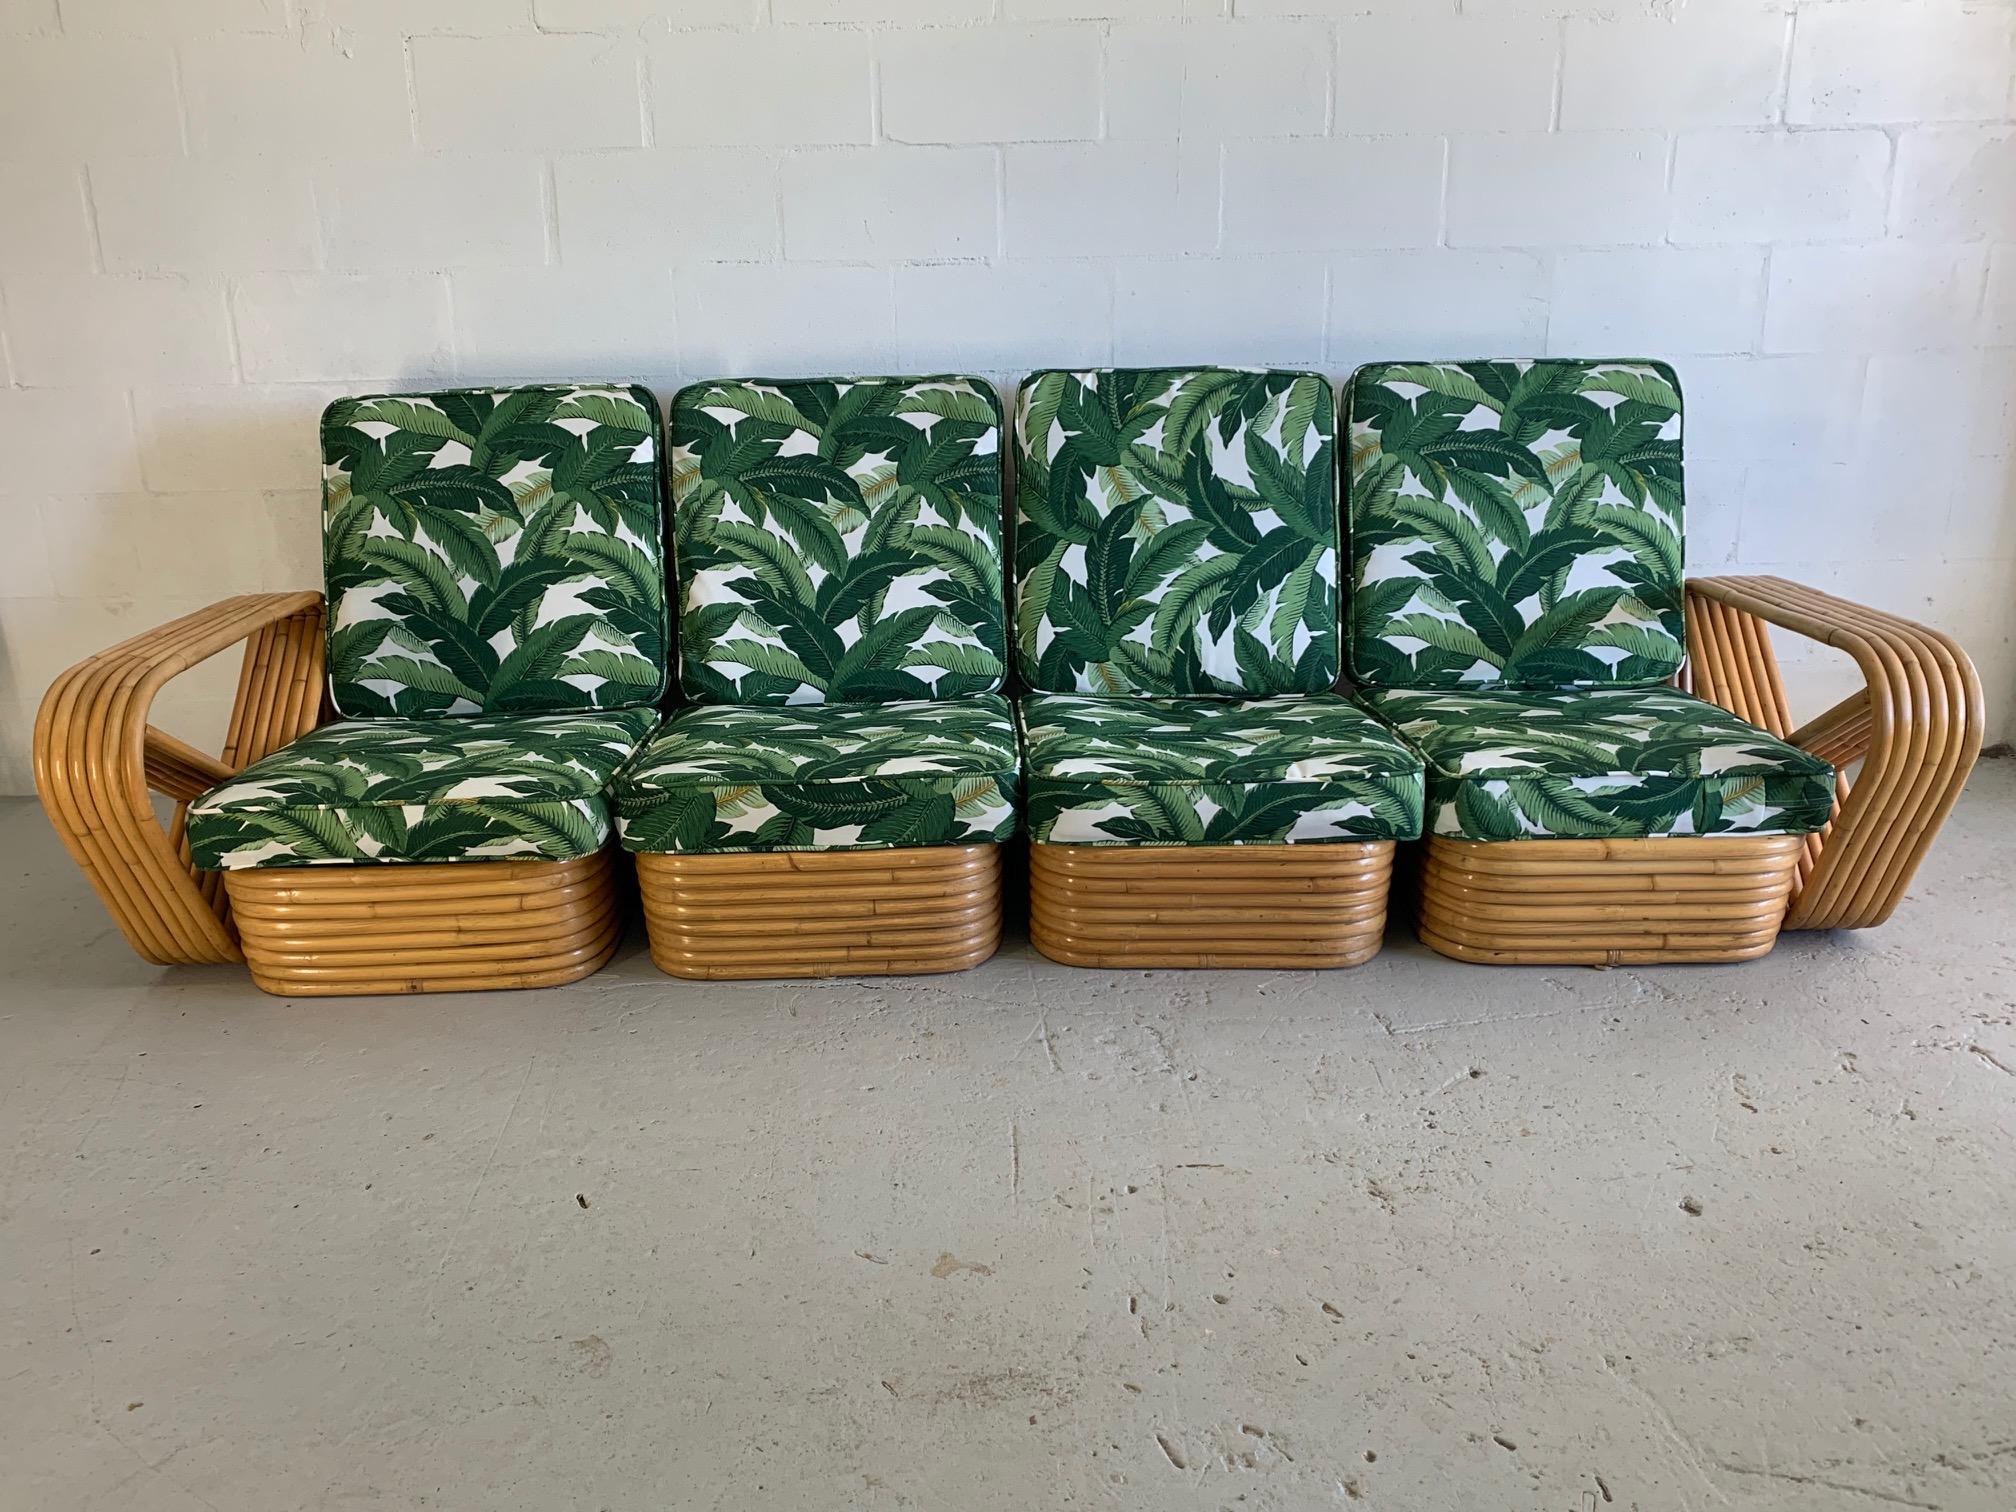 Four-piece modular rattan pretzel style pretzel sofa features 6-strand frame and newly upholstered tropical palm leaf fabric. Reminiscent of styles from Paul Frankl and others. Very good condition both structurally and cosmetically with minor